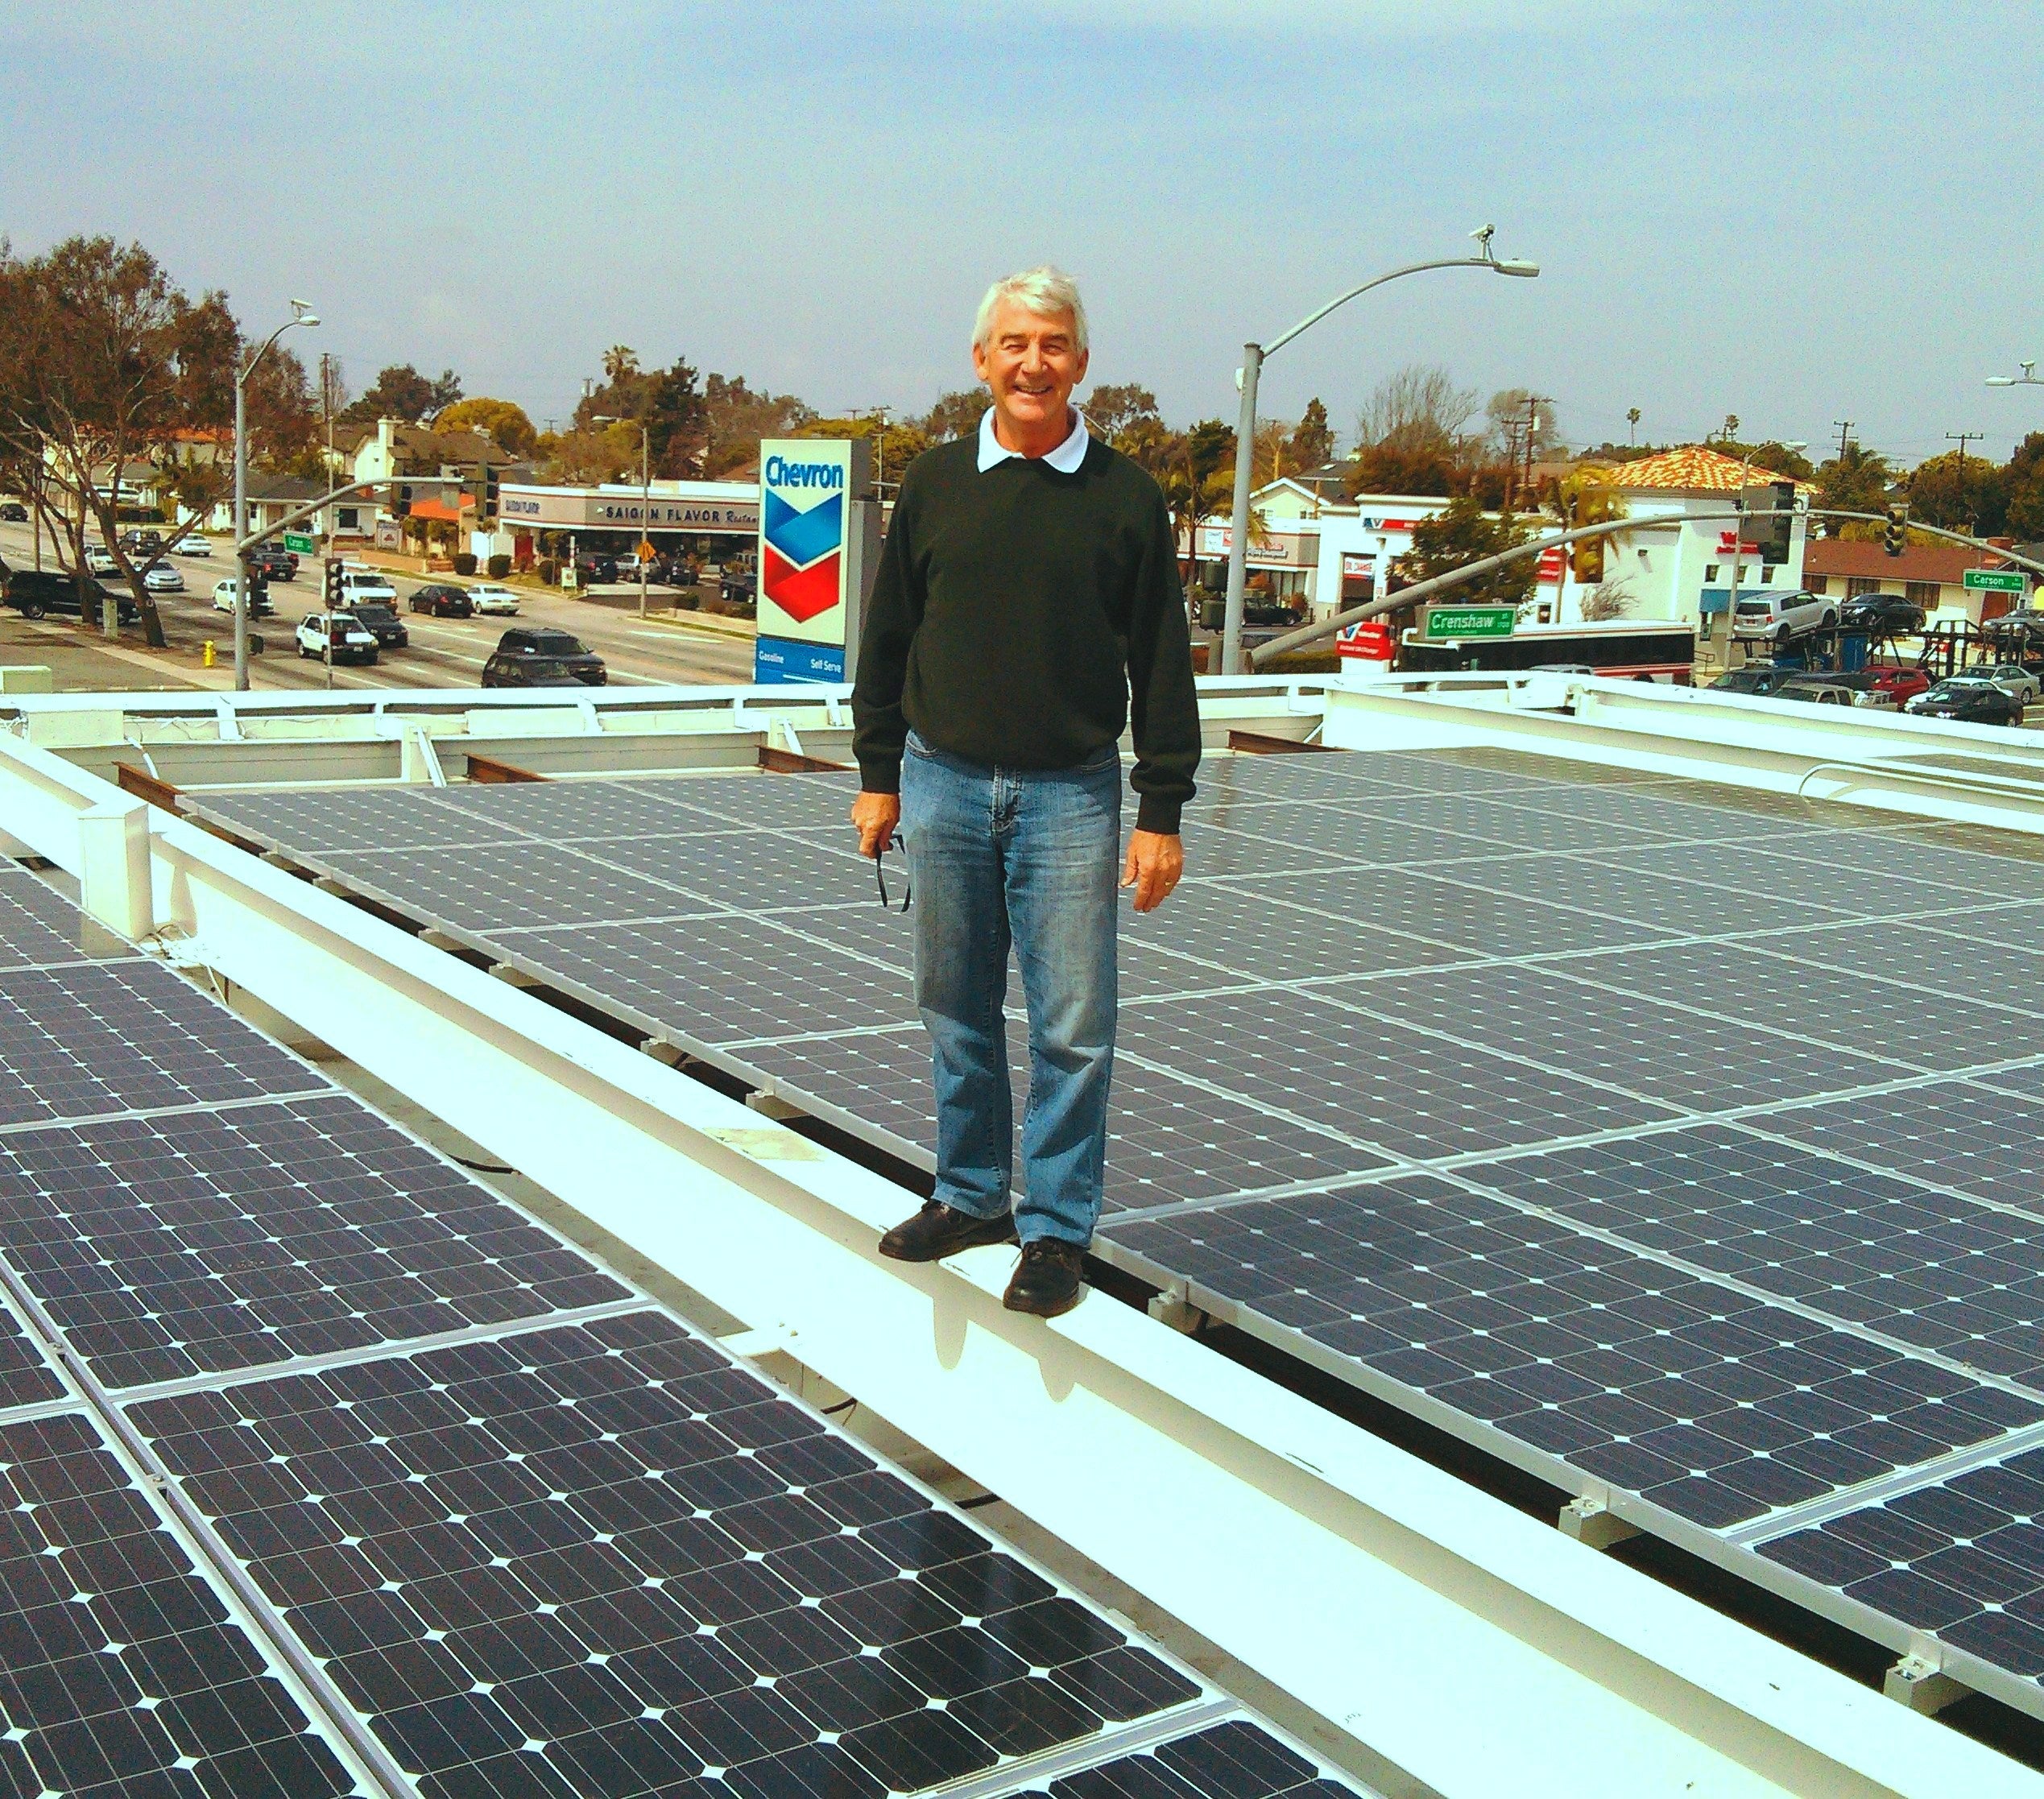 Convenience Stores and Small Business REALLY Benefit from Solar